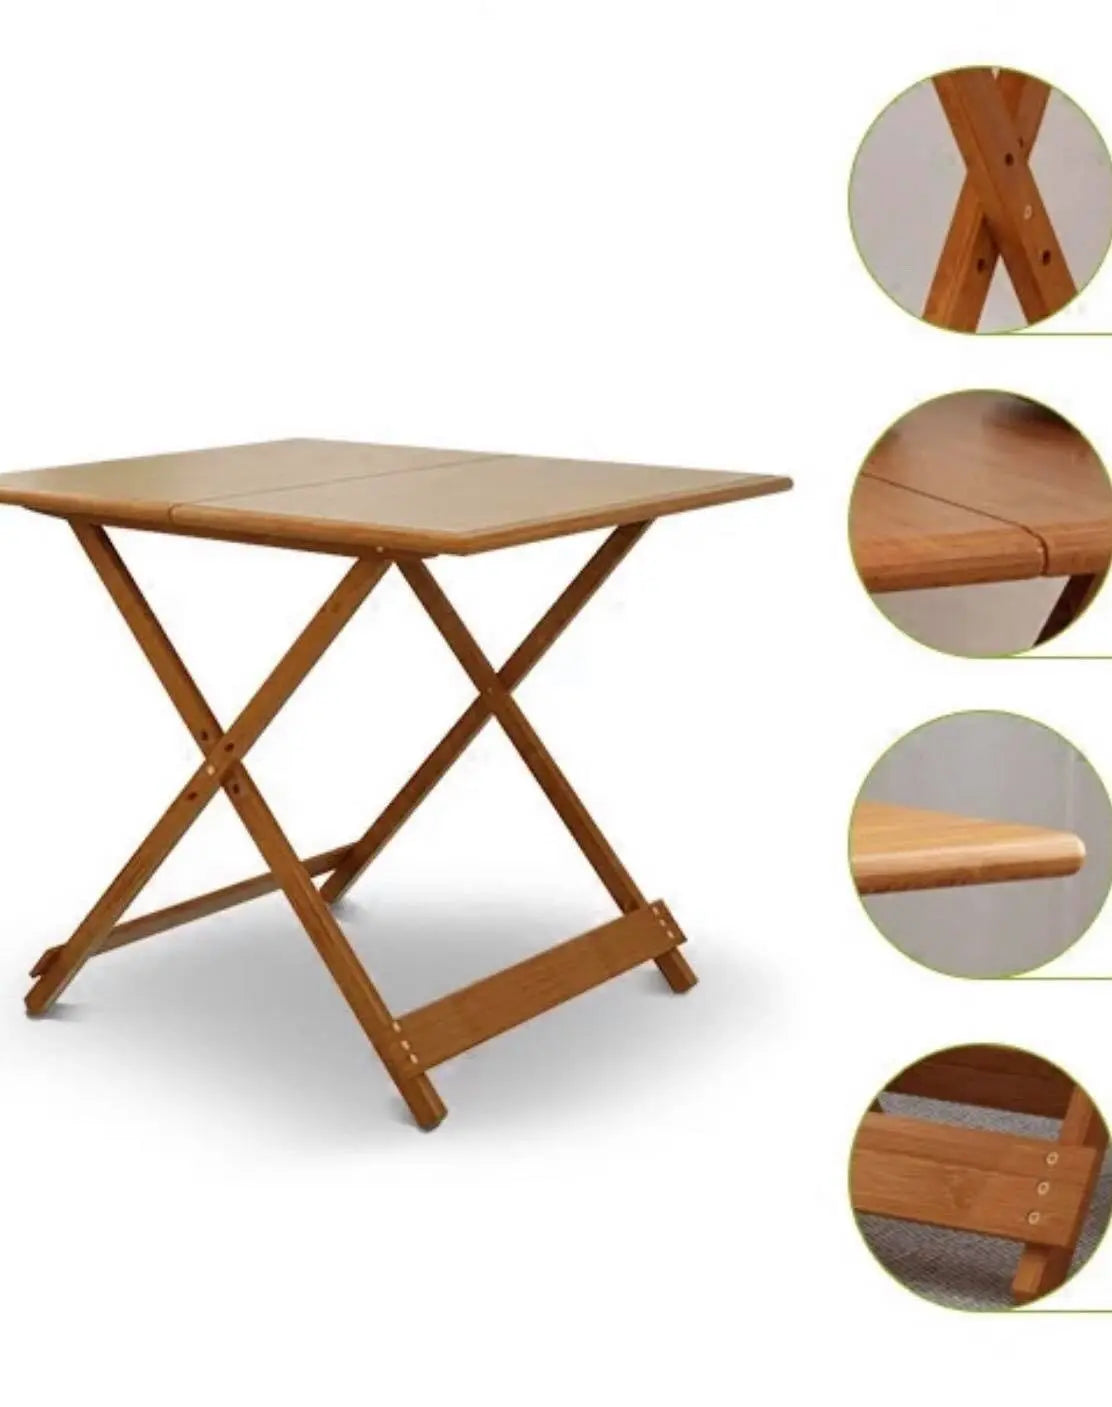 Bamboo Wooden Table Square Or Round Foldable Dining Study Picnic In or Outdoor竹桌 everythingbamboo